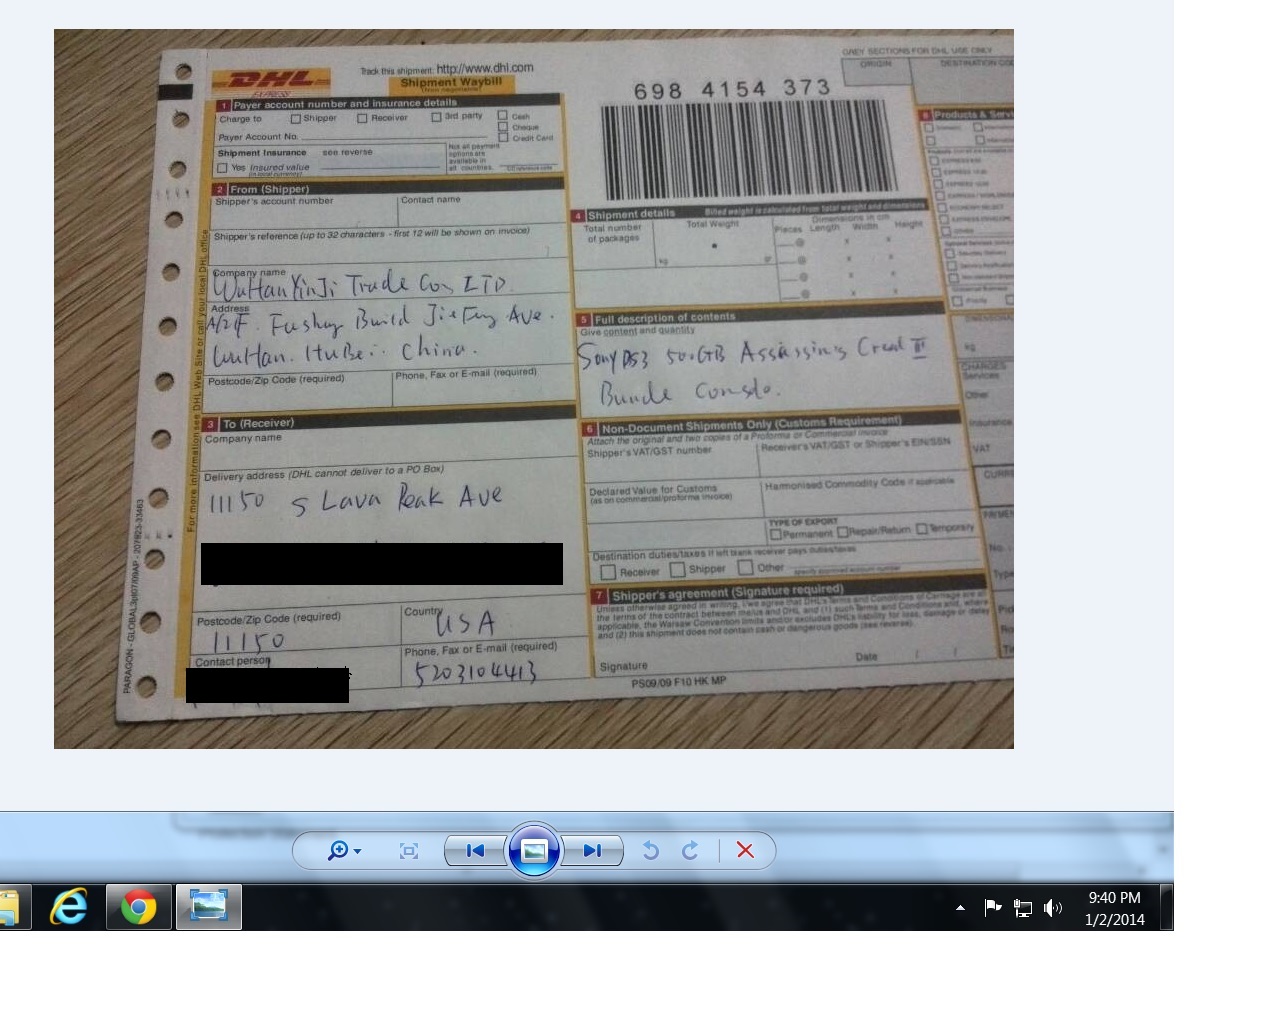 Only a copy of one DHL form I was sent. I have the others